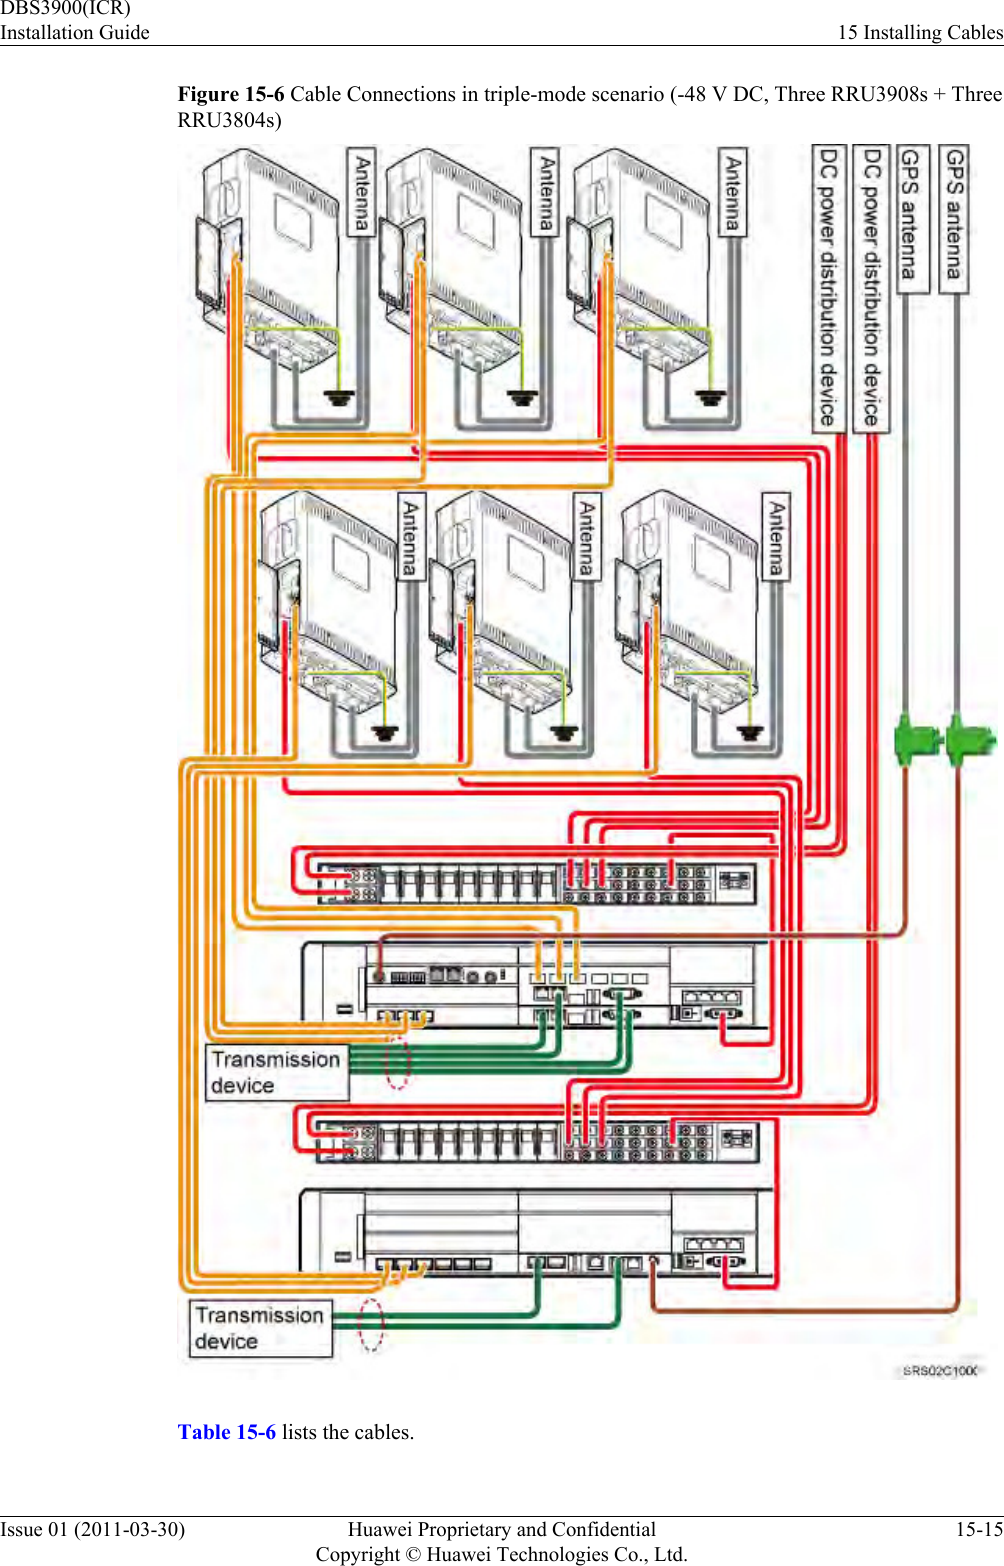 Figure 15-6 Cable Connections in triple-mode scenario (-48 V DC, Three RRU3908s + ThreeRRU3804s)Table 15-6 lists the cables.DBS3900(ICR)Installation Guide 15 Installing CablesIssue 01 (2011-03-30) Huawei Proprietary and ConfidentialCopyright © Huawei Technologies Co., Ltd.15-15